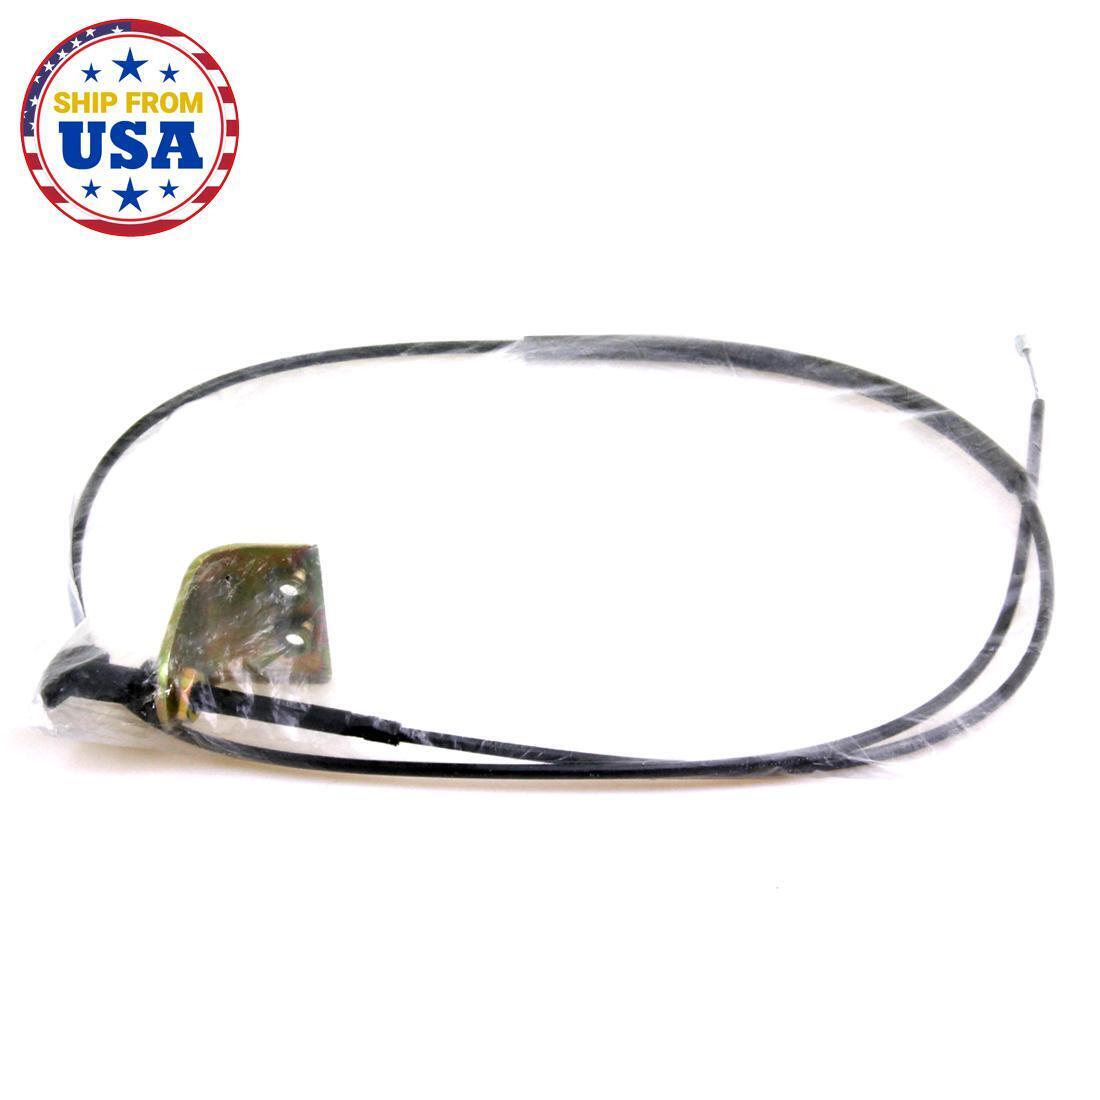 NEW HOOD RELEASE CABLE FIT FOR 1968-1973 DATSUN 521 PICKUP